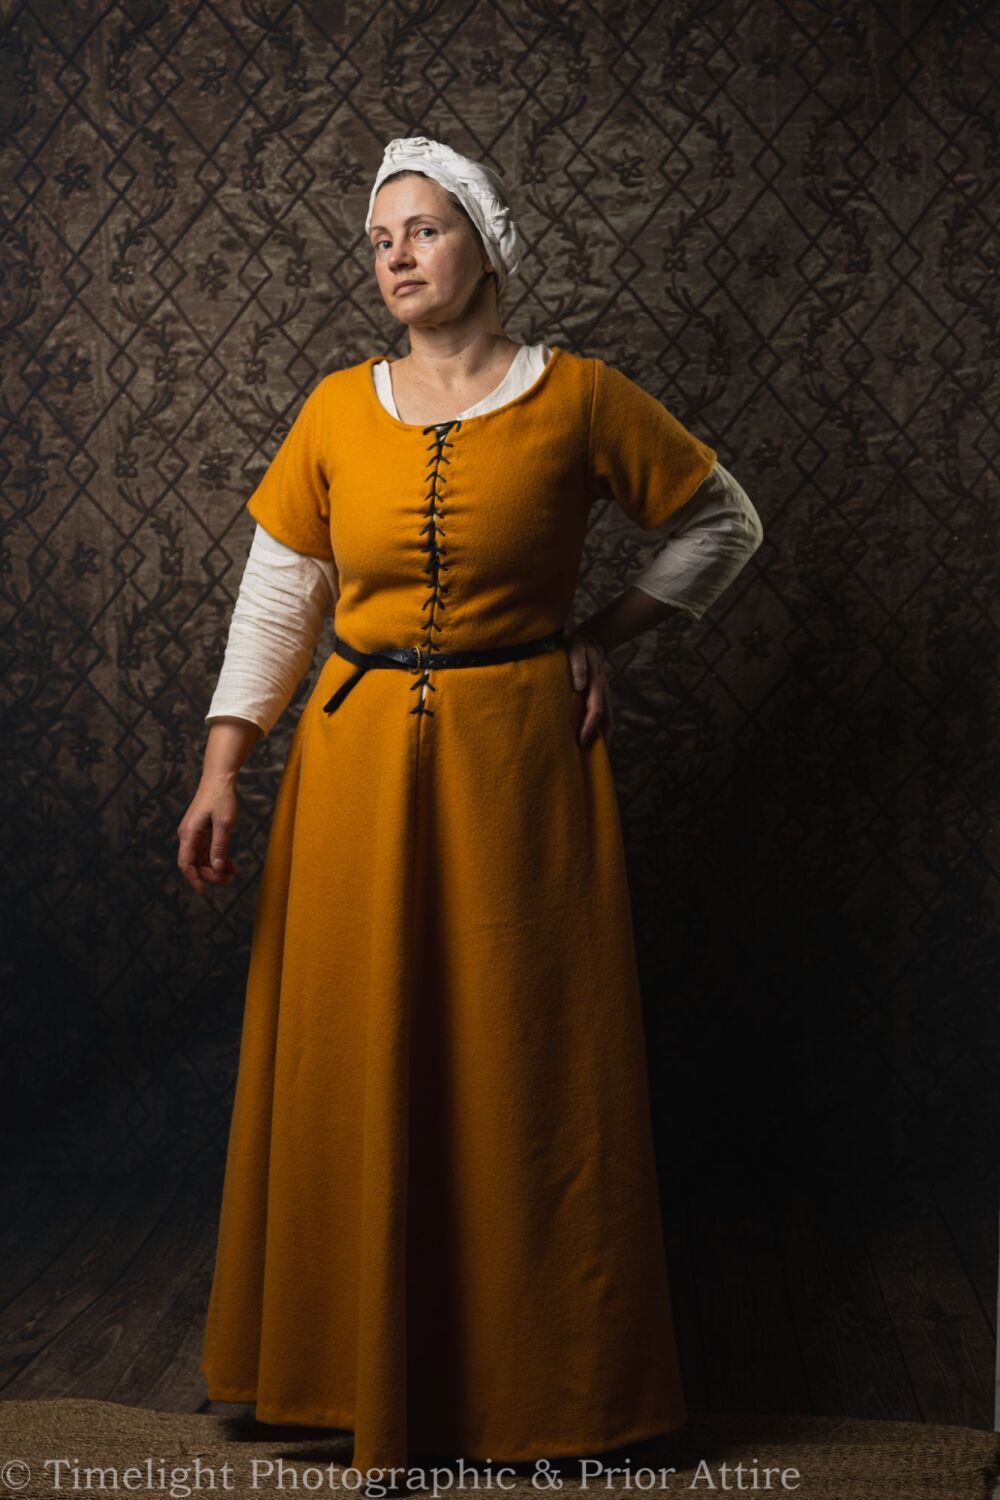 Late Medieval dress/kirtle